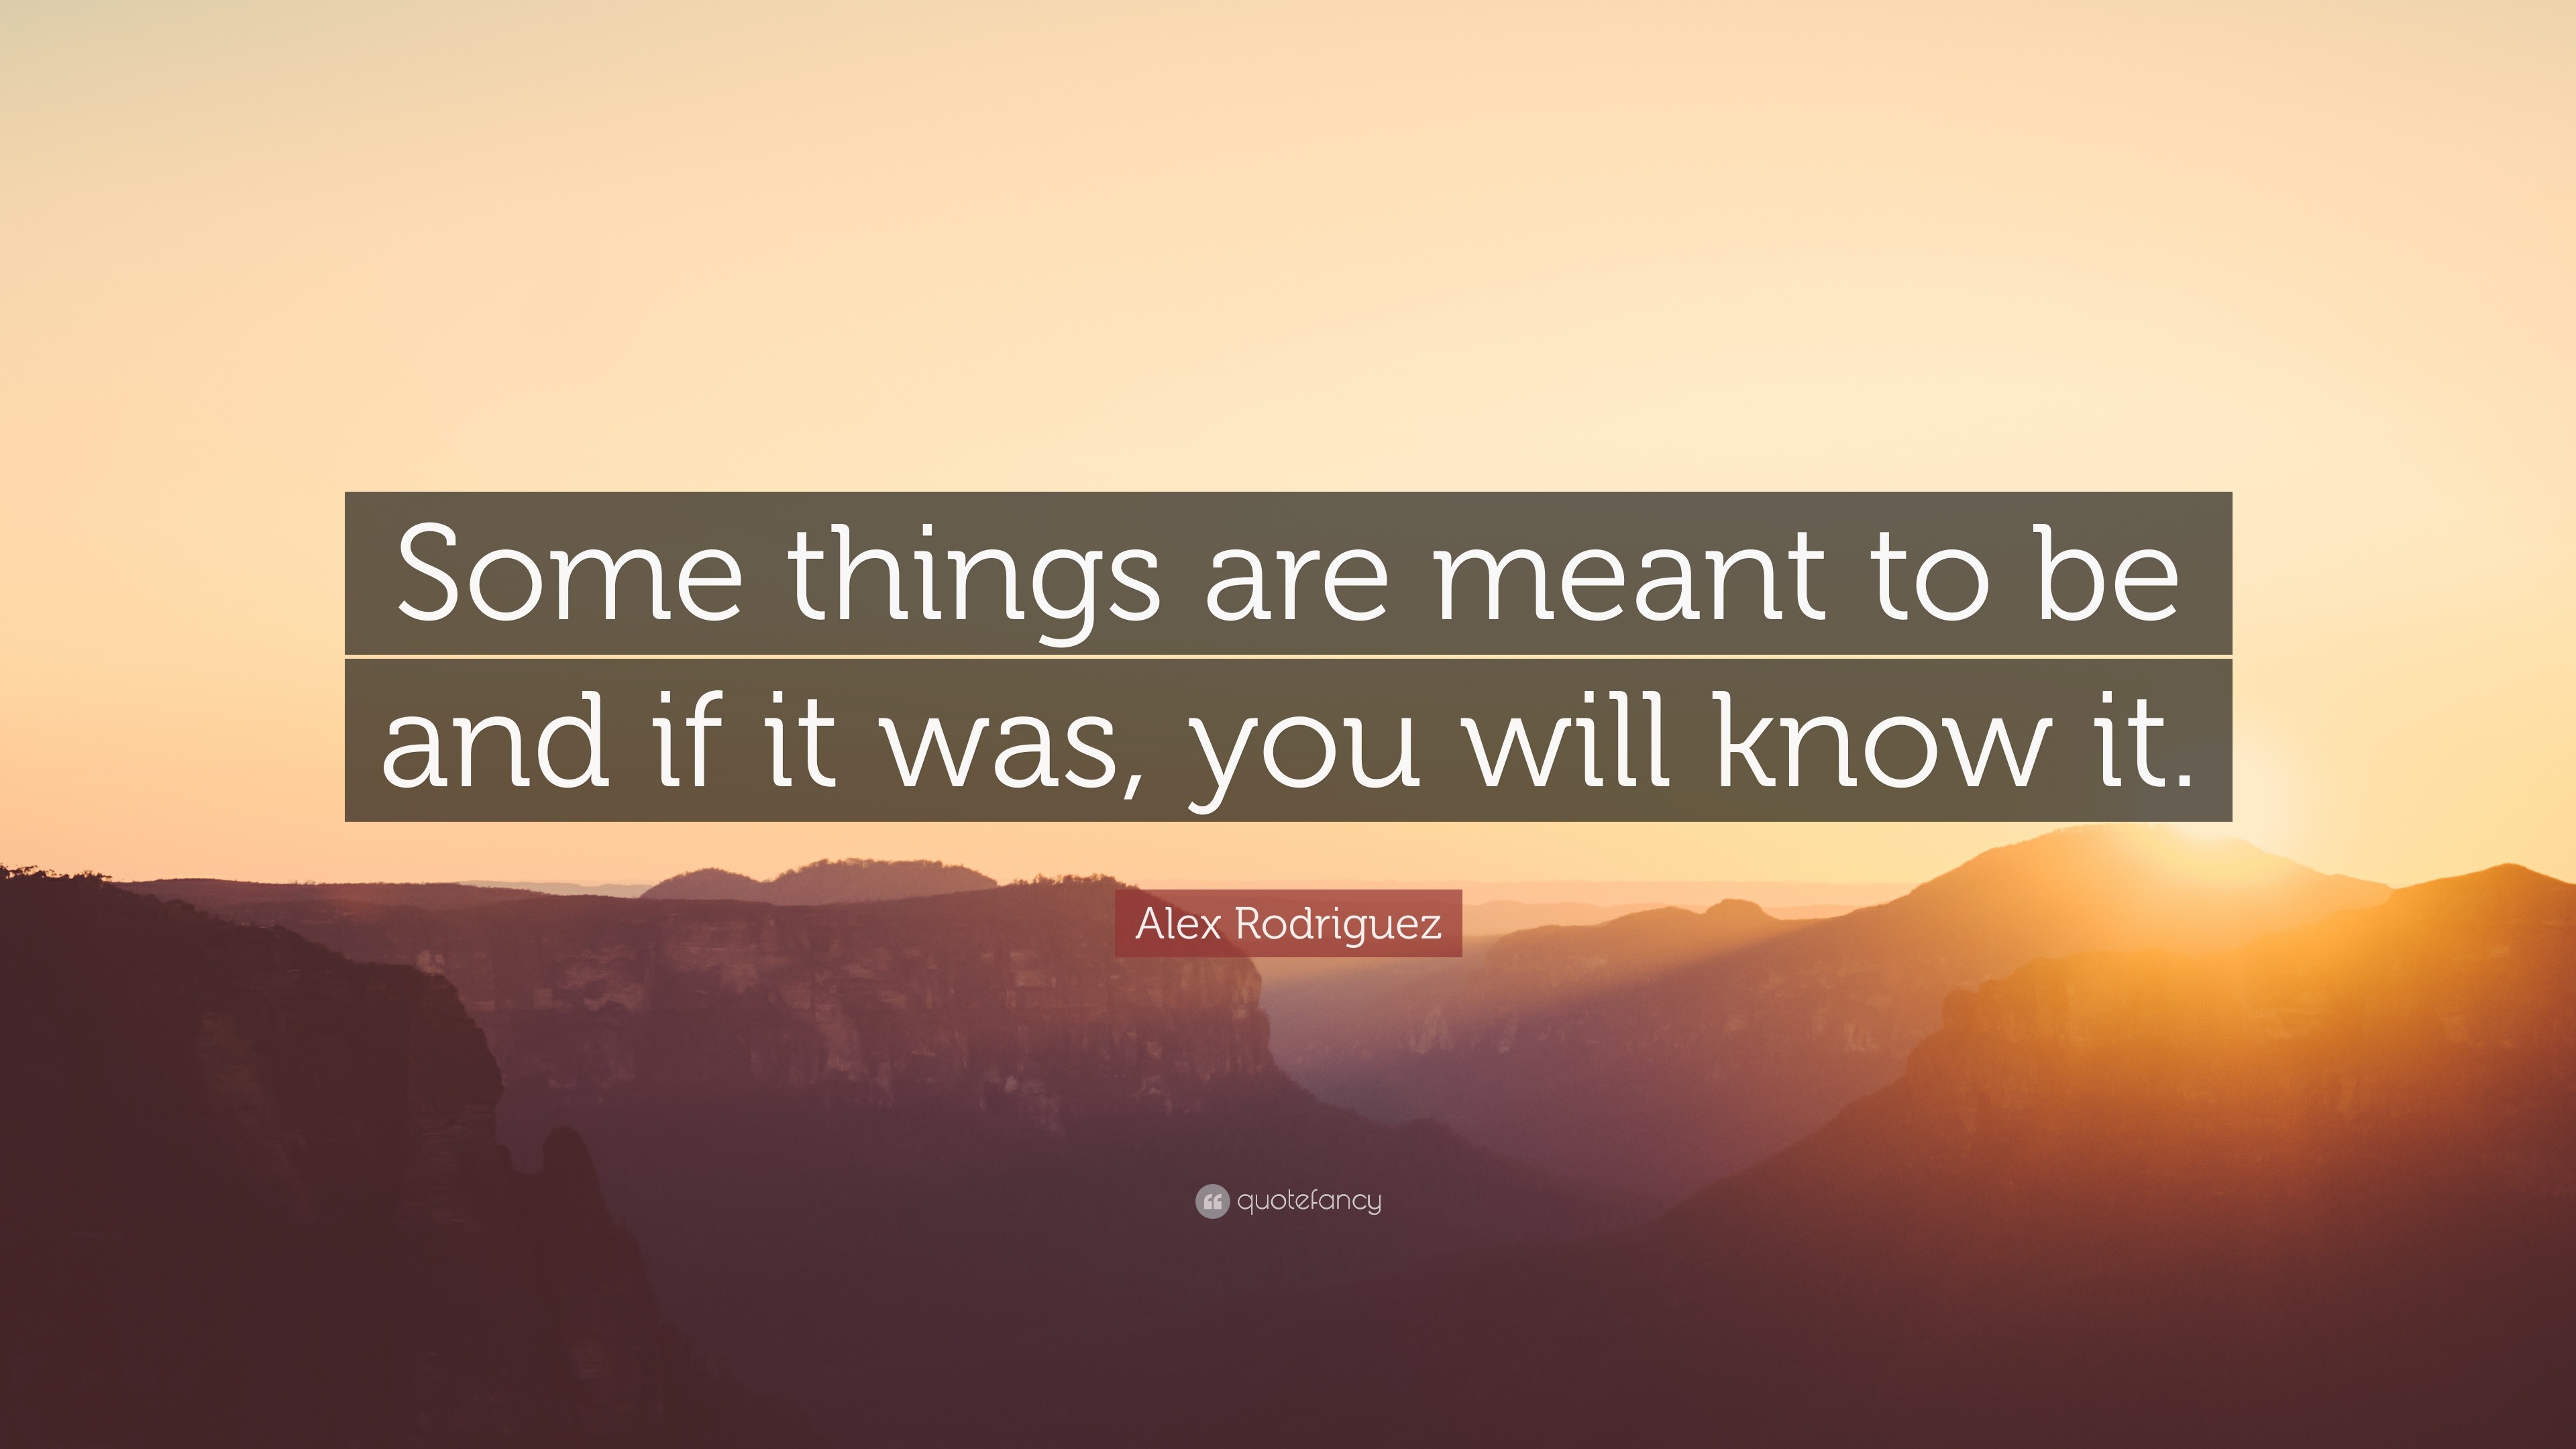 Alex Rodriguez Quote: “Some Things Are Meant To Be And If It Was, You Will Know